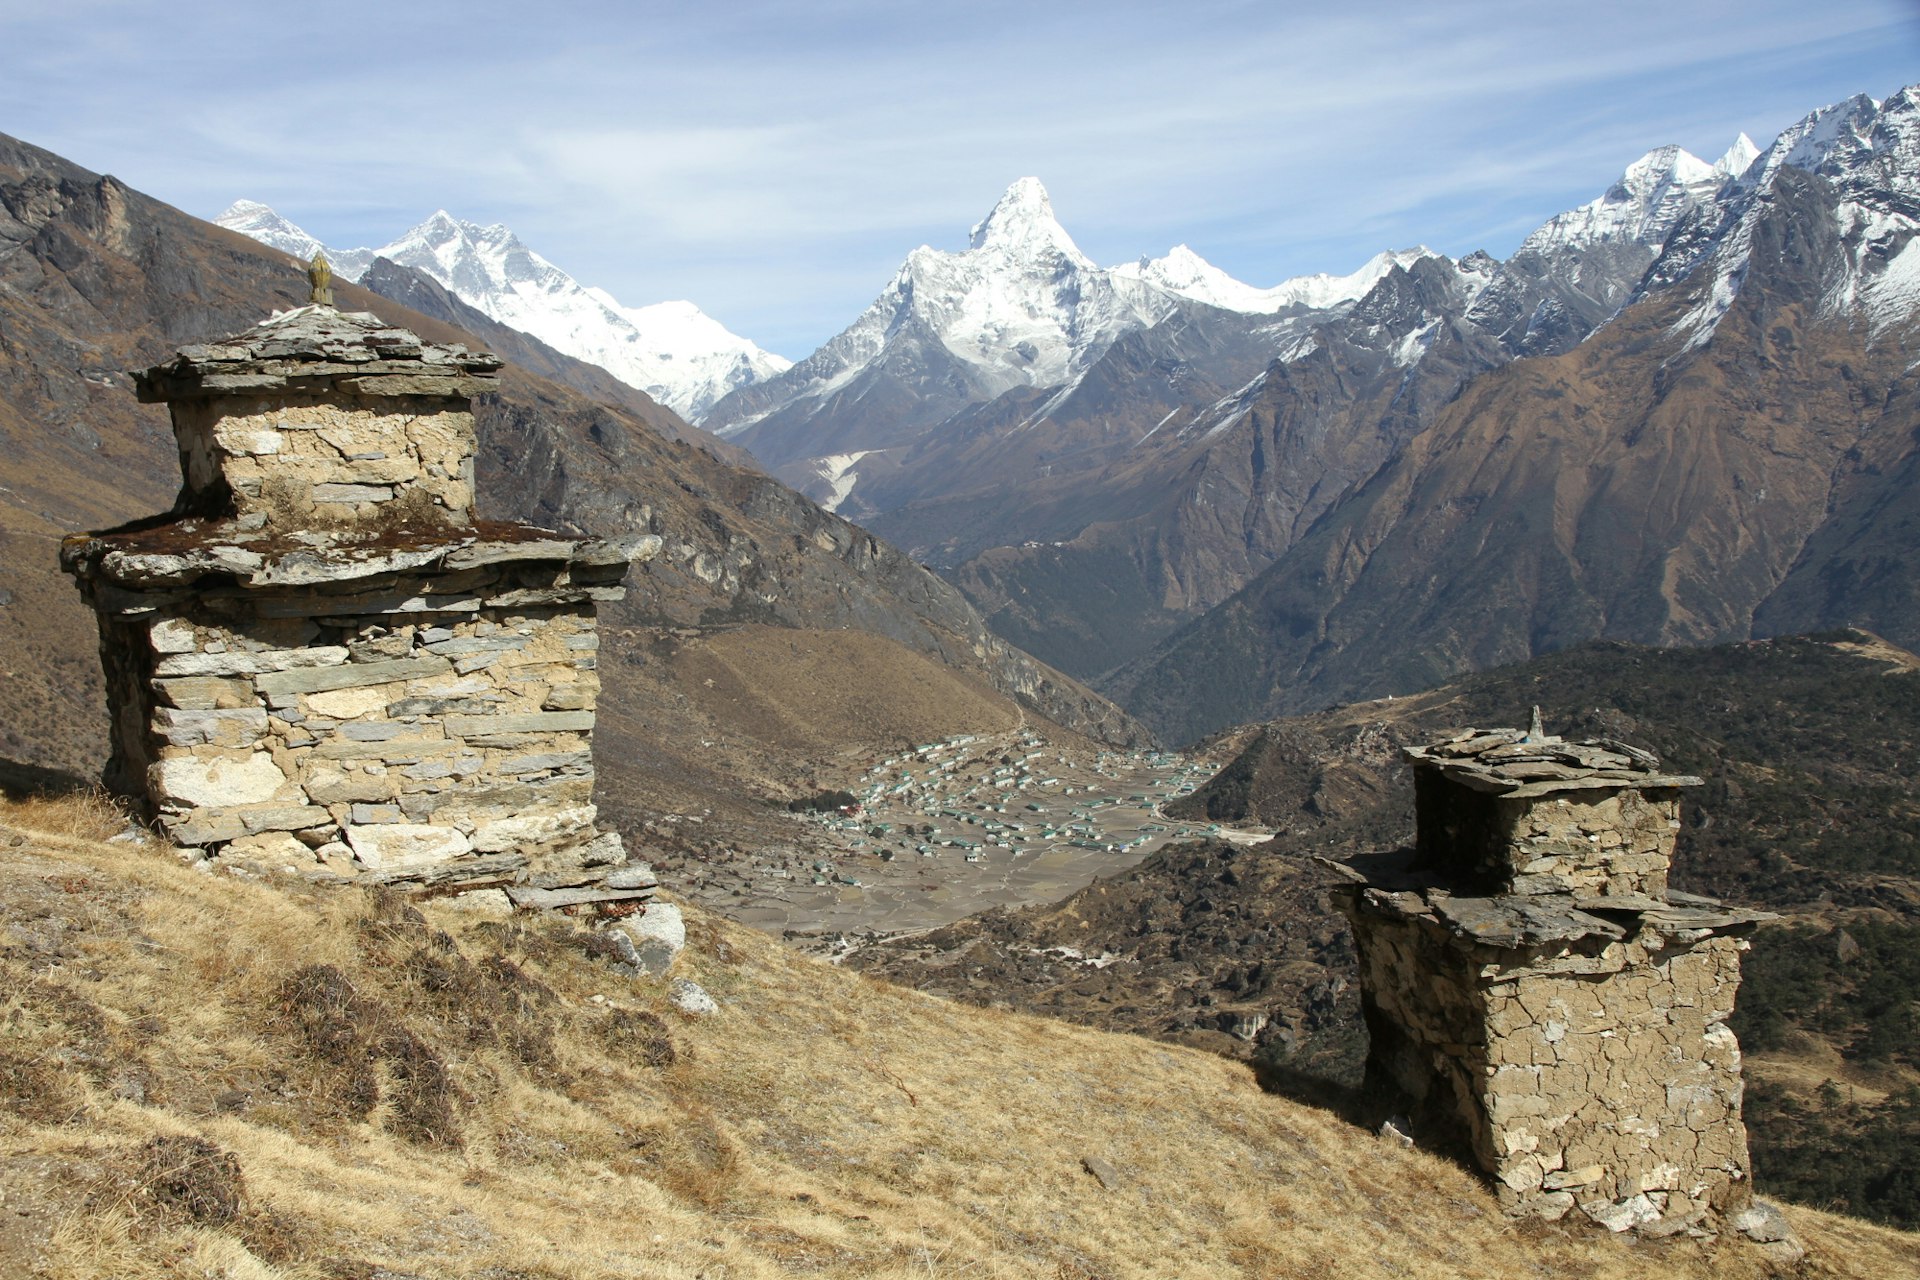 Hillary chortens on the ridge above Kunde. Image by Bradley Mayhew / Lonely Planet